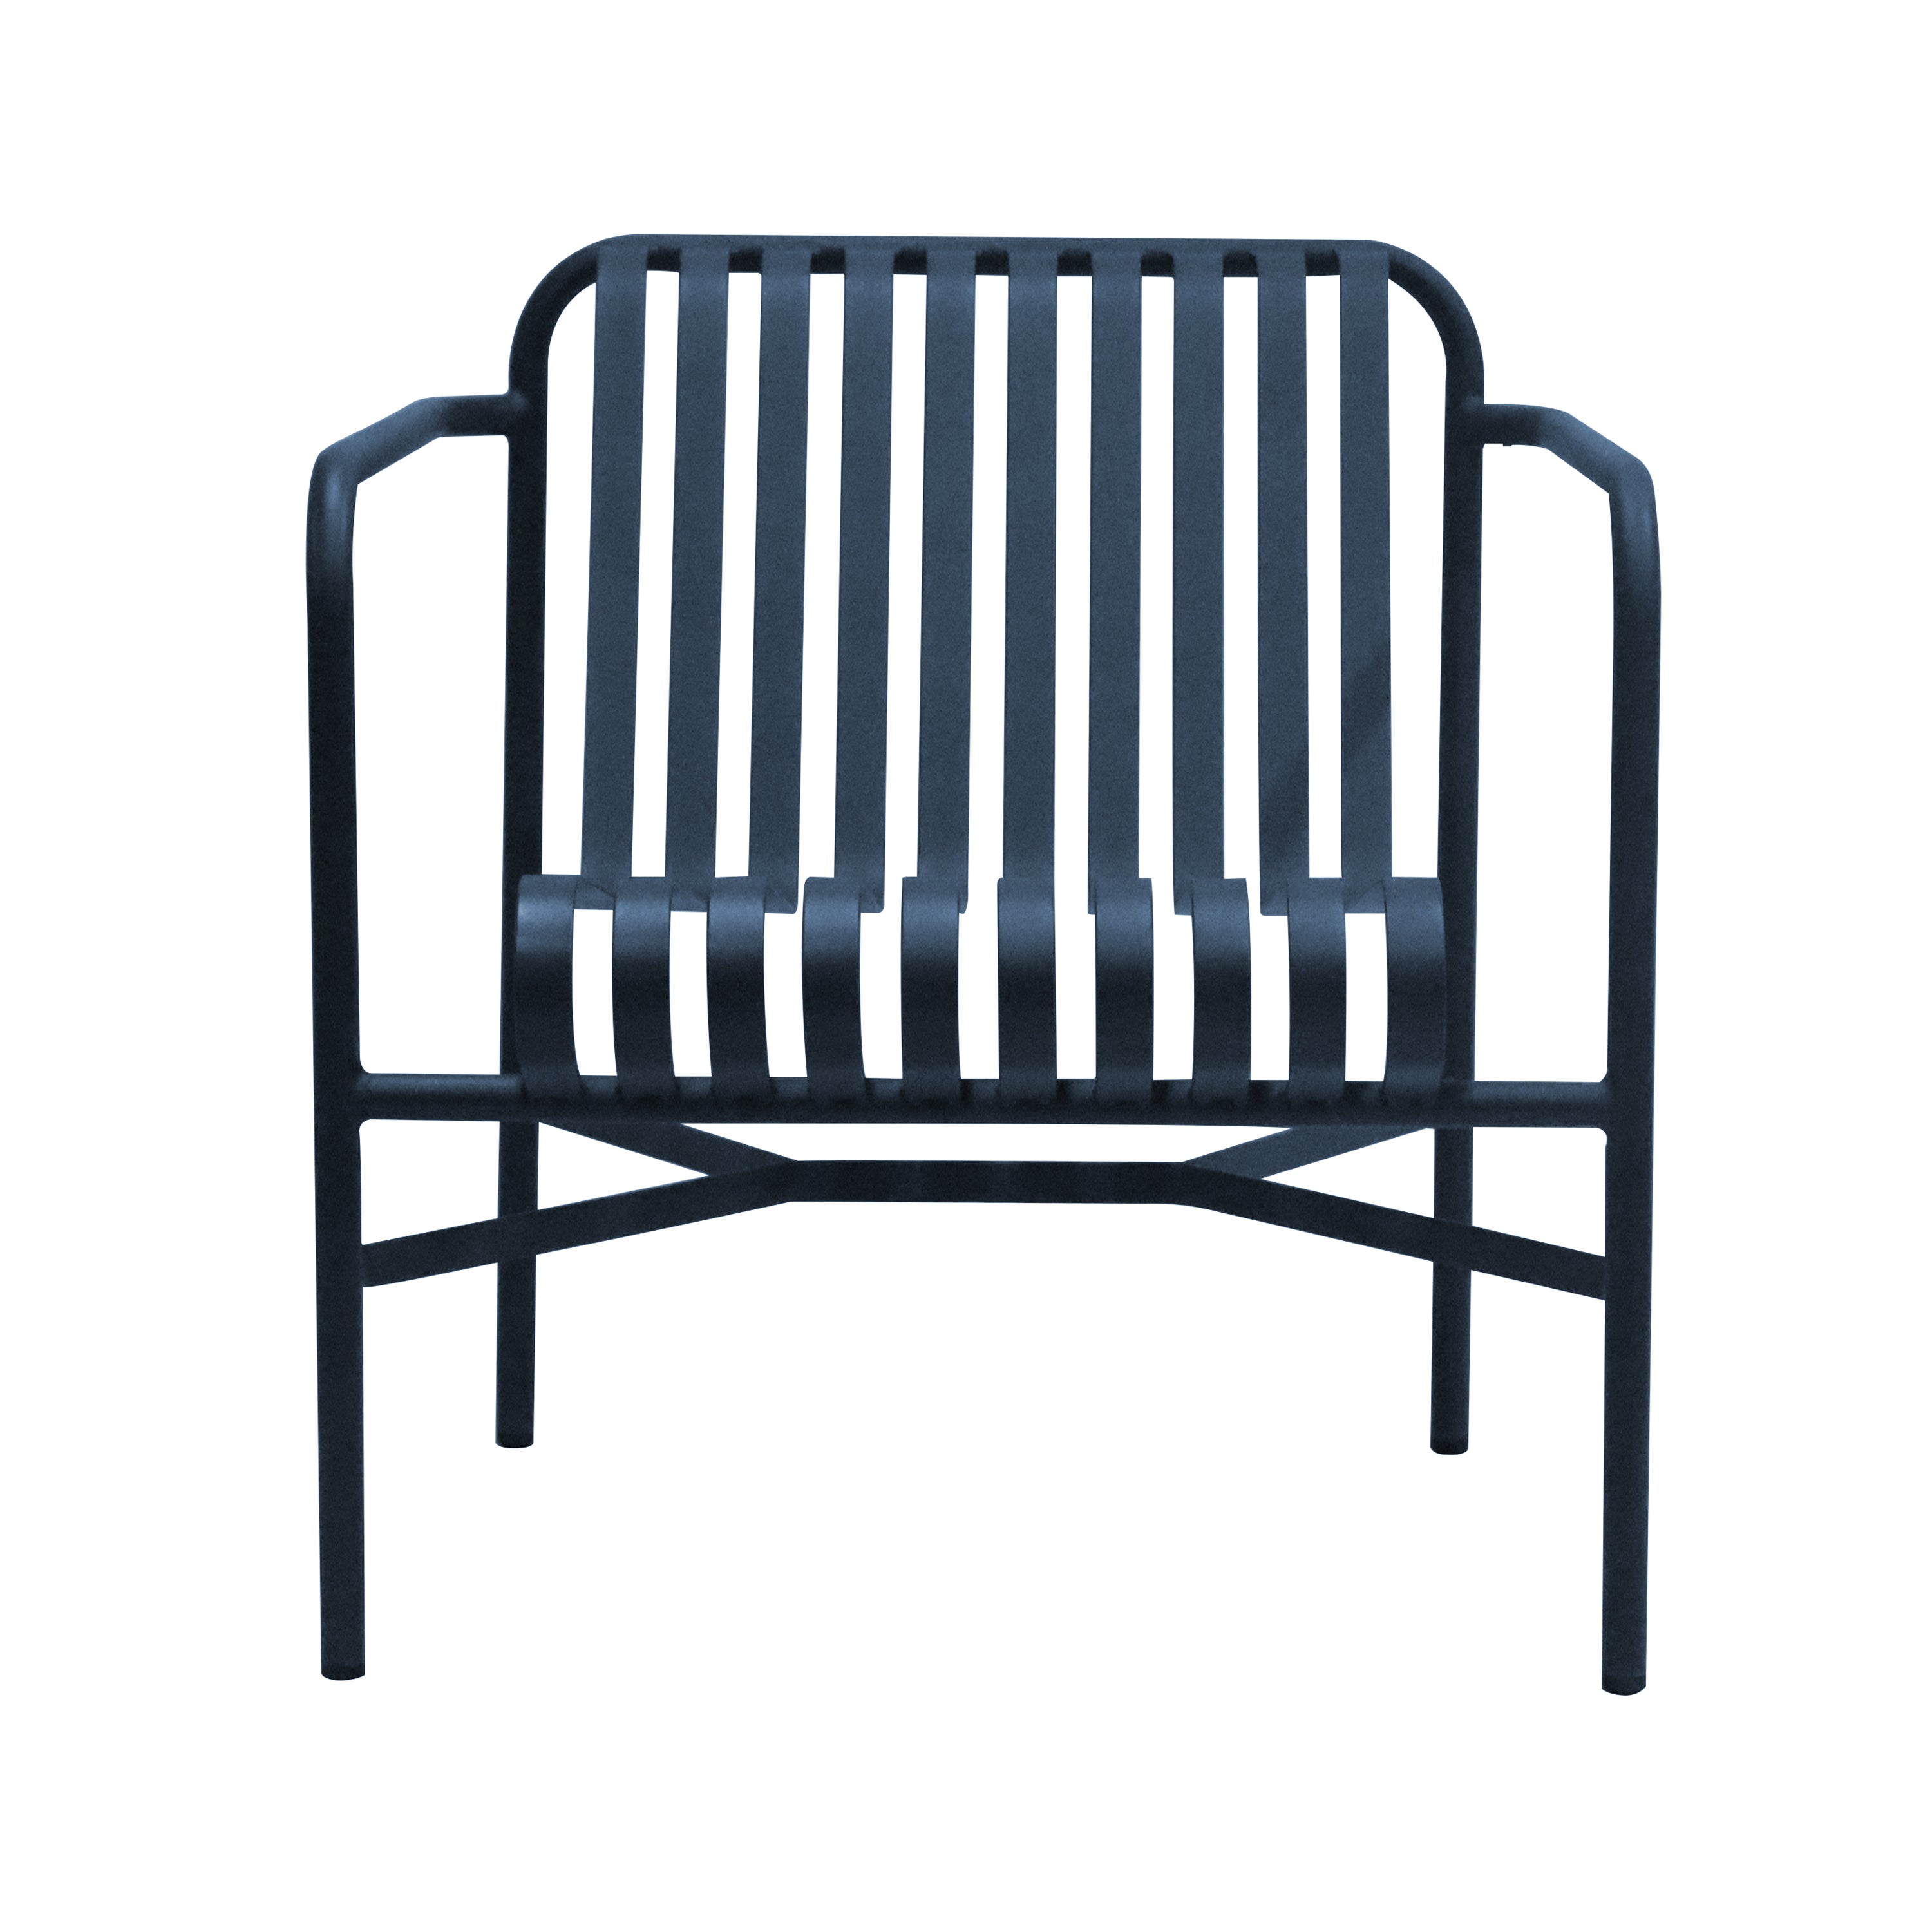 Euro Style Outdoor Chairs - Enid Outdoor Lounge Chair in Dark Blue - Set of 1